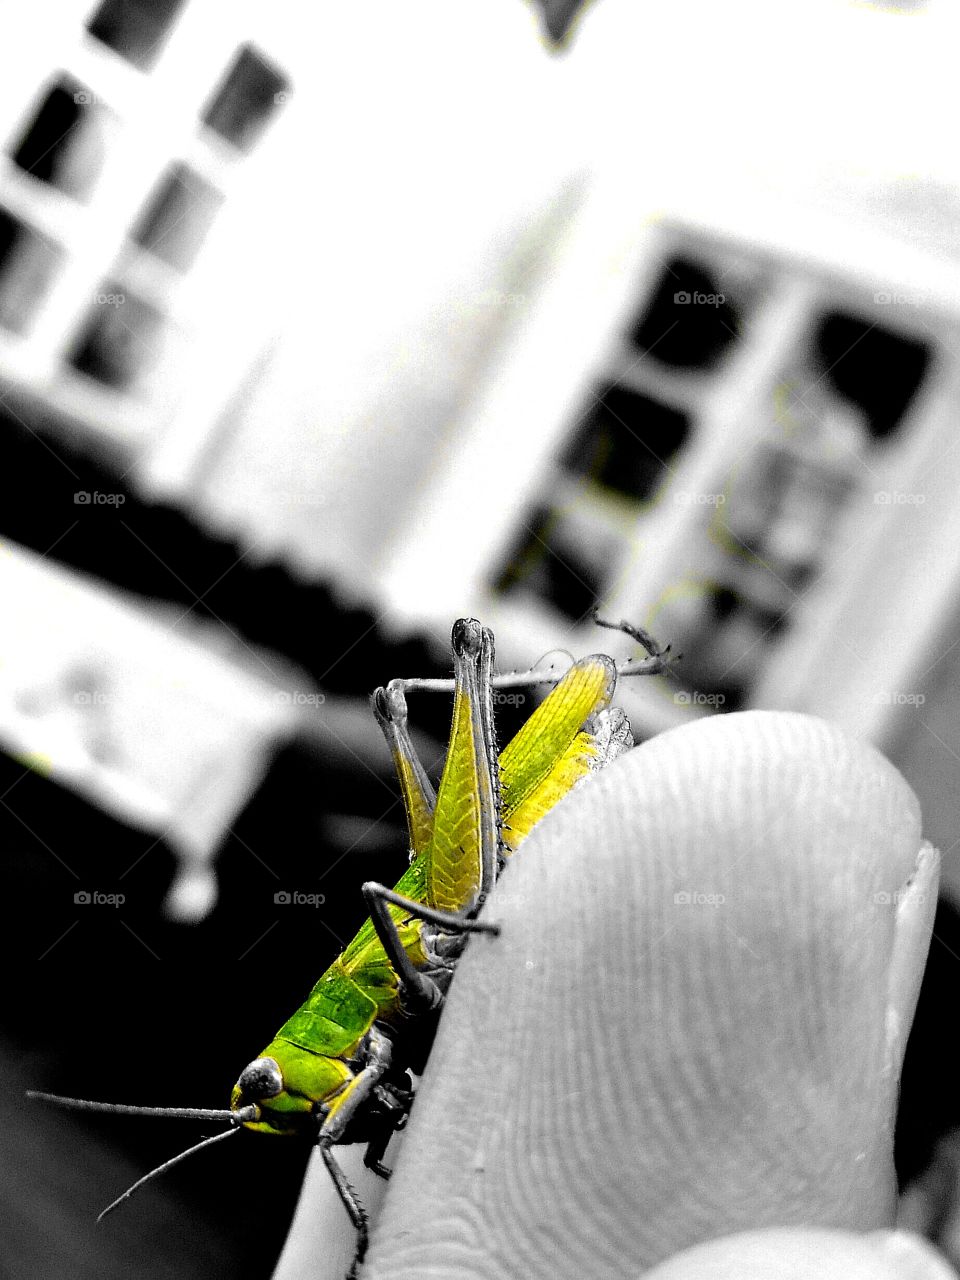 grasshopper close up green,yellow and black